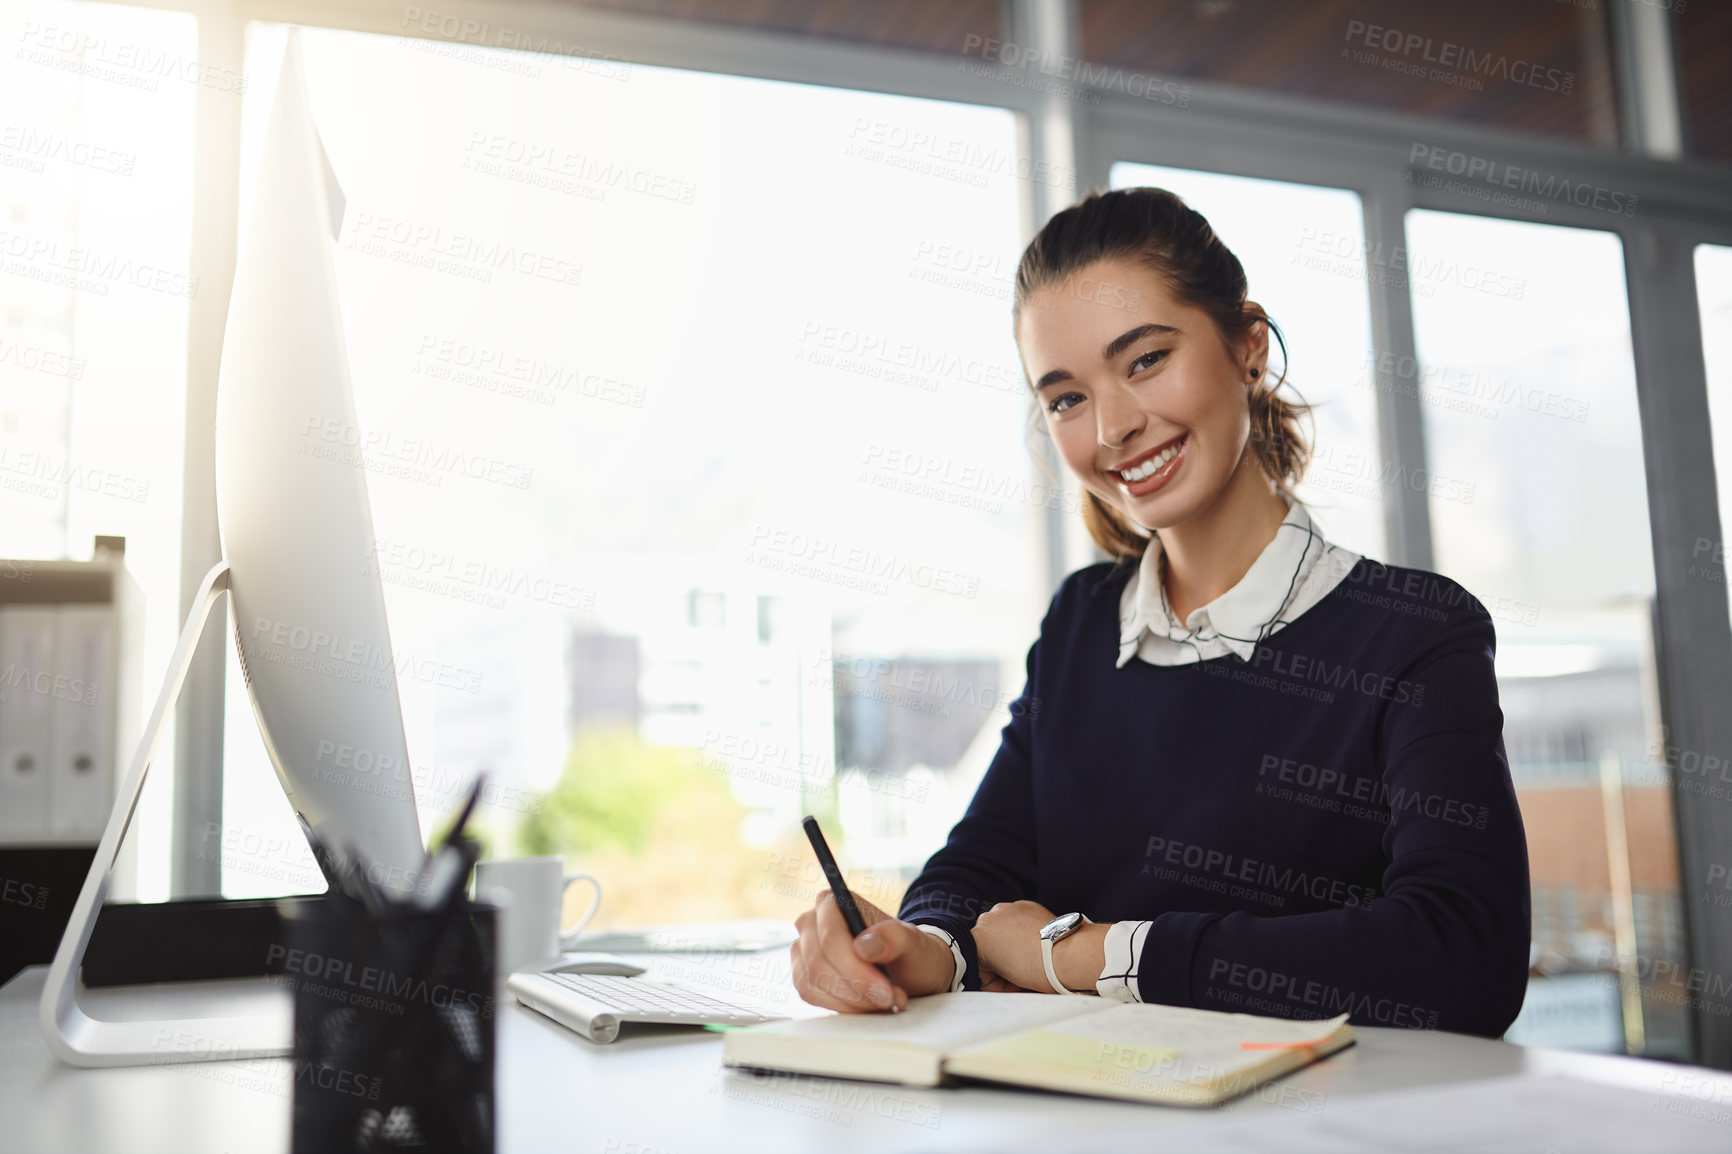 Buy stock photo Portrait of an attractive young businesswoman smiling and sitting at her desk while writing notes in a modern office